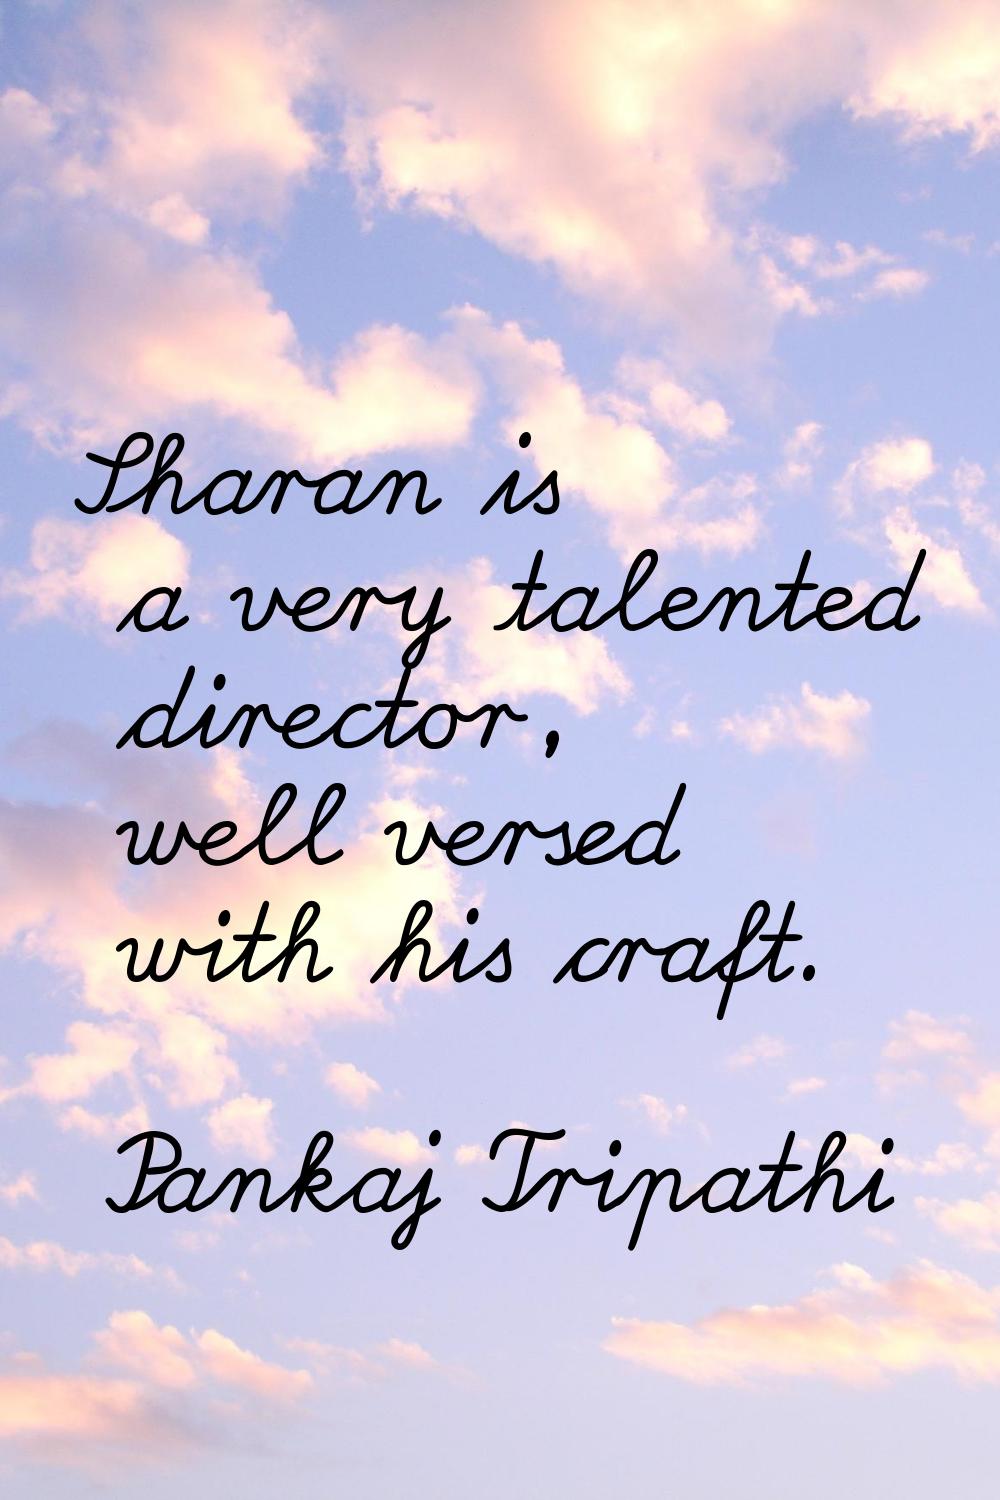 Sharan is a very talented director, well versed with his craft.